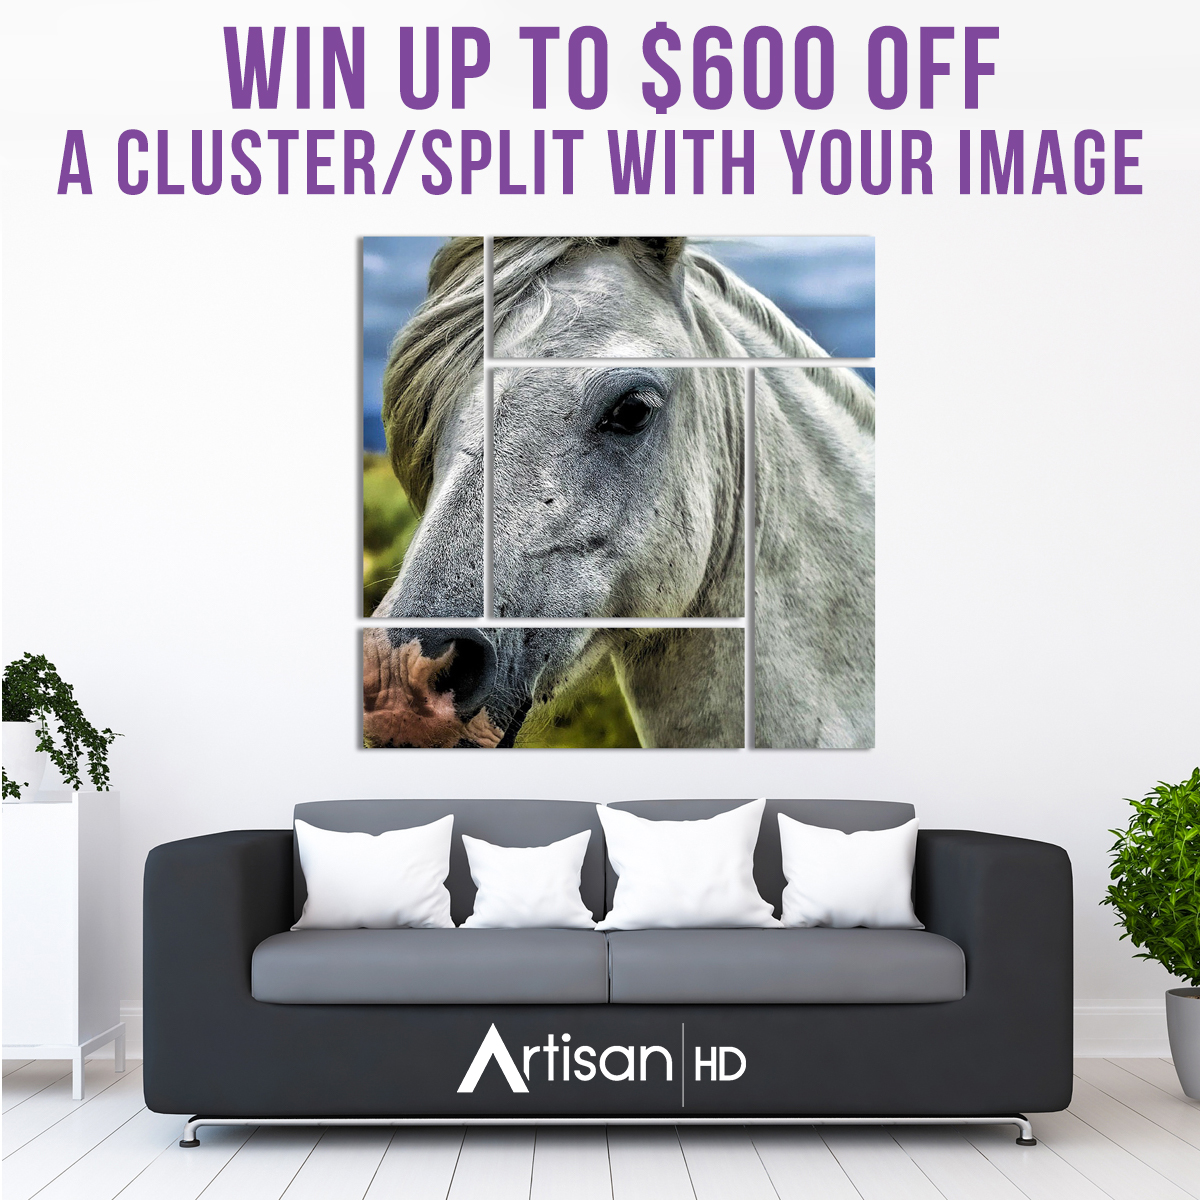 ArtisanHD Clusters and Splits Giveaway: Win up to $600 Off Your Own Cluster or Split Art Gallery